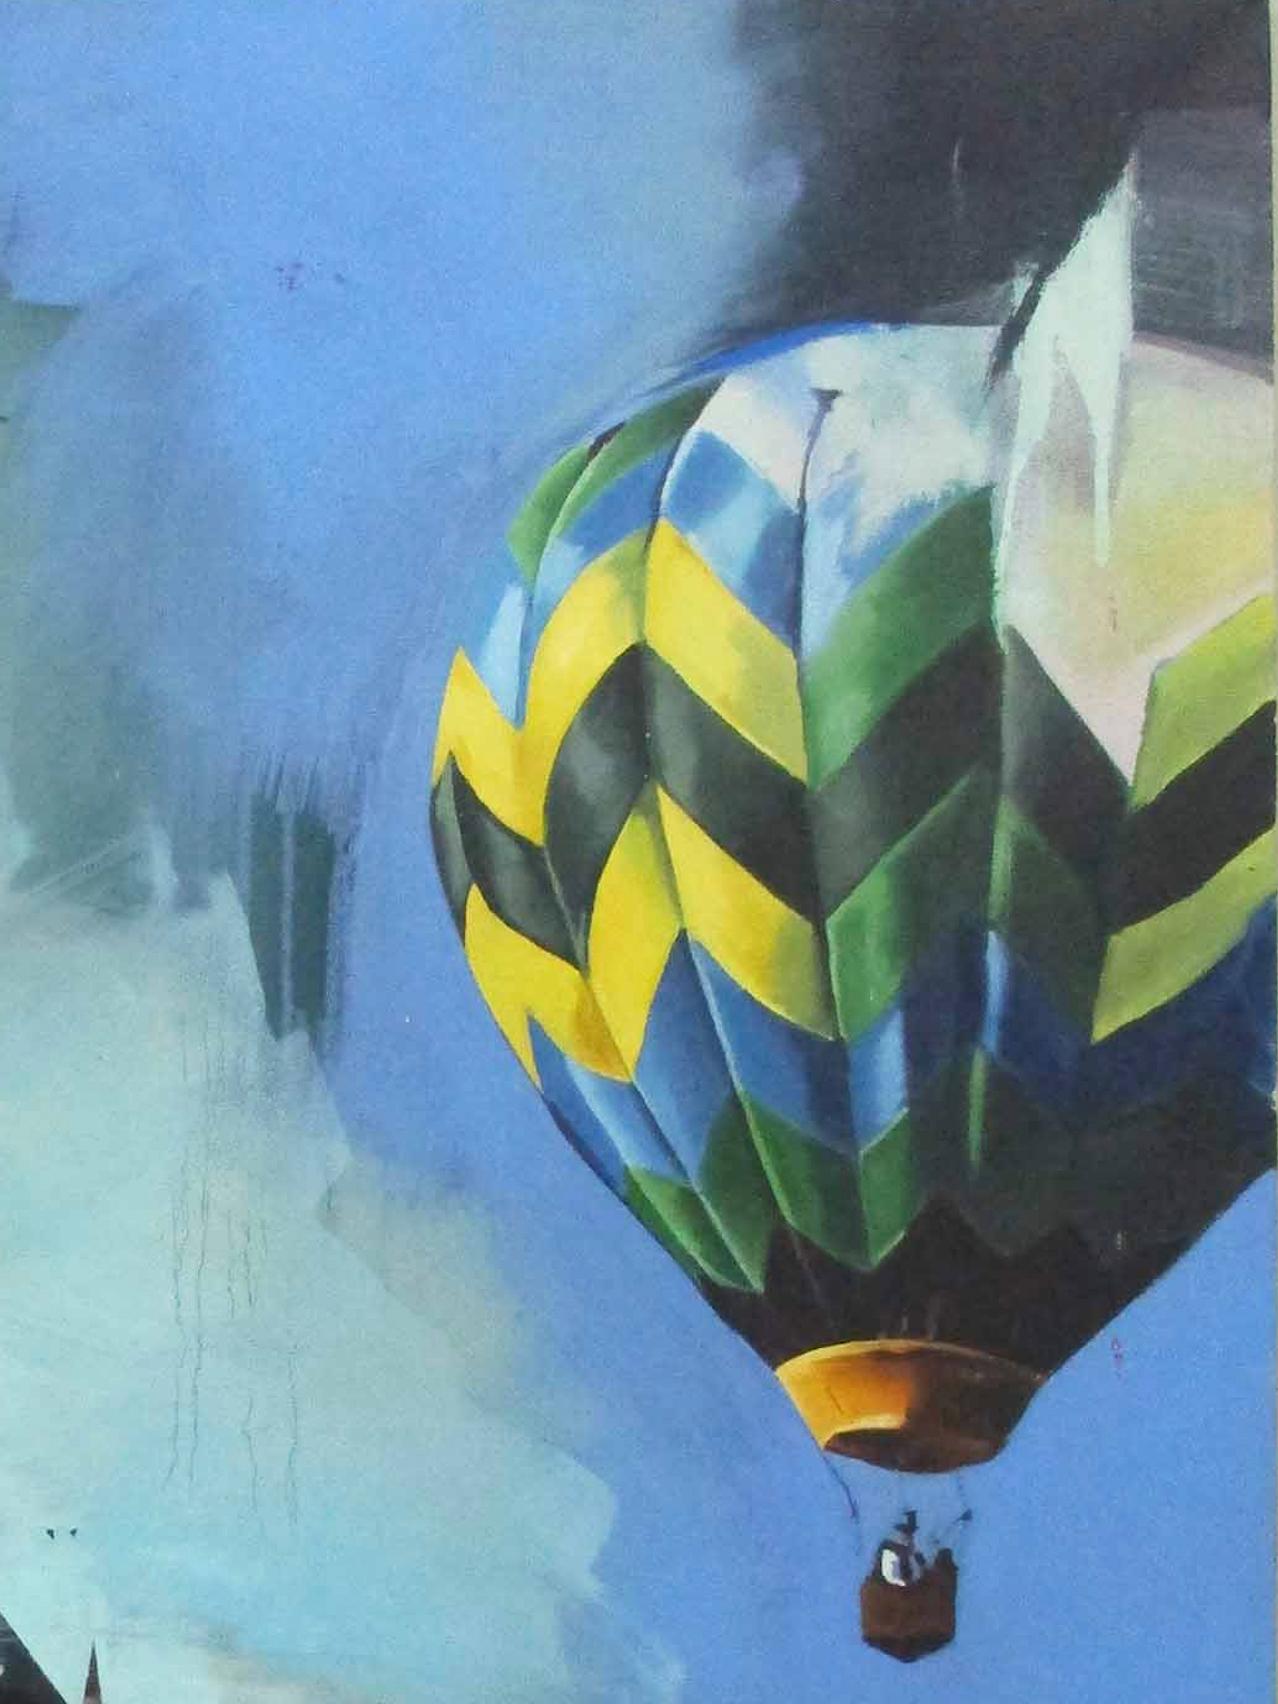 Hot Air Balloon - Contemporary, Blue, Original, Canvas, Street Art, Figurative - Painting by Chloe Early